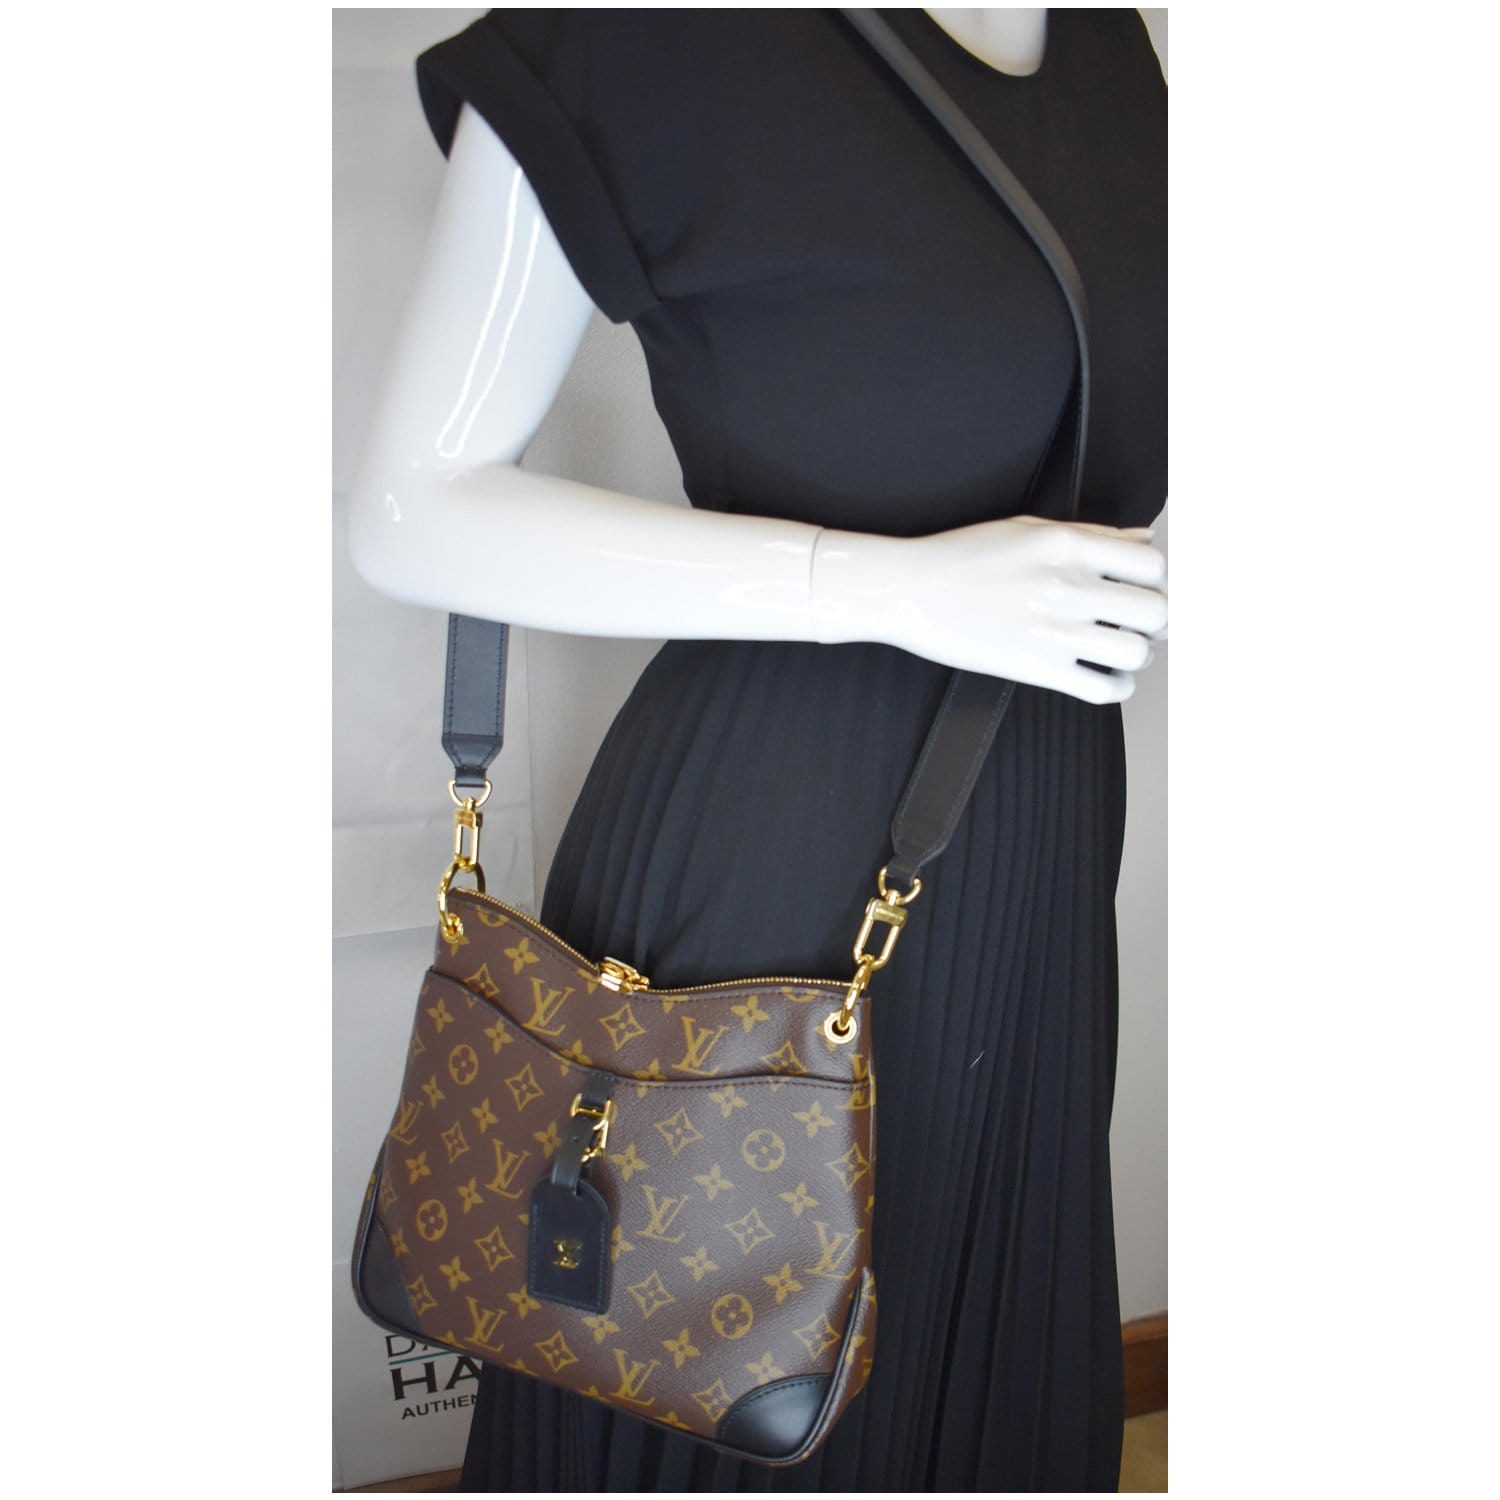 Louis Vuitton, Bags, Great Condition Comes With Dust Bag And Can Provide Lv  Box Odeon Pm